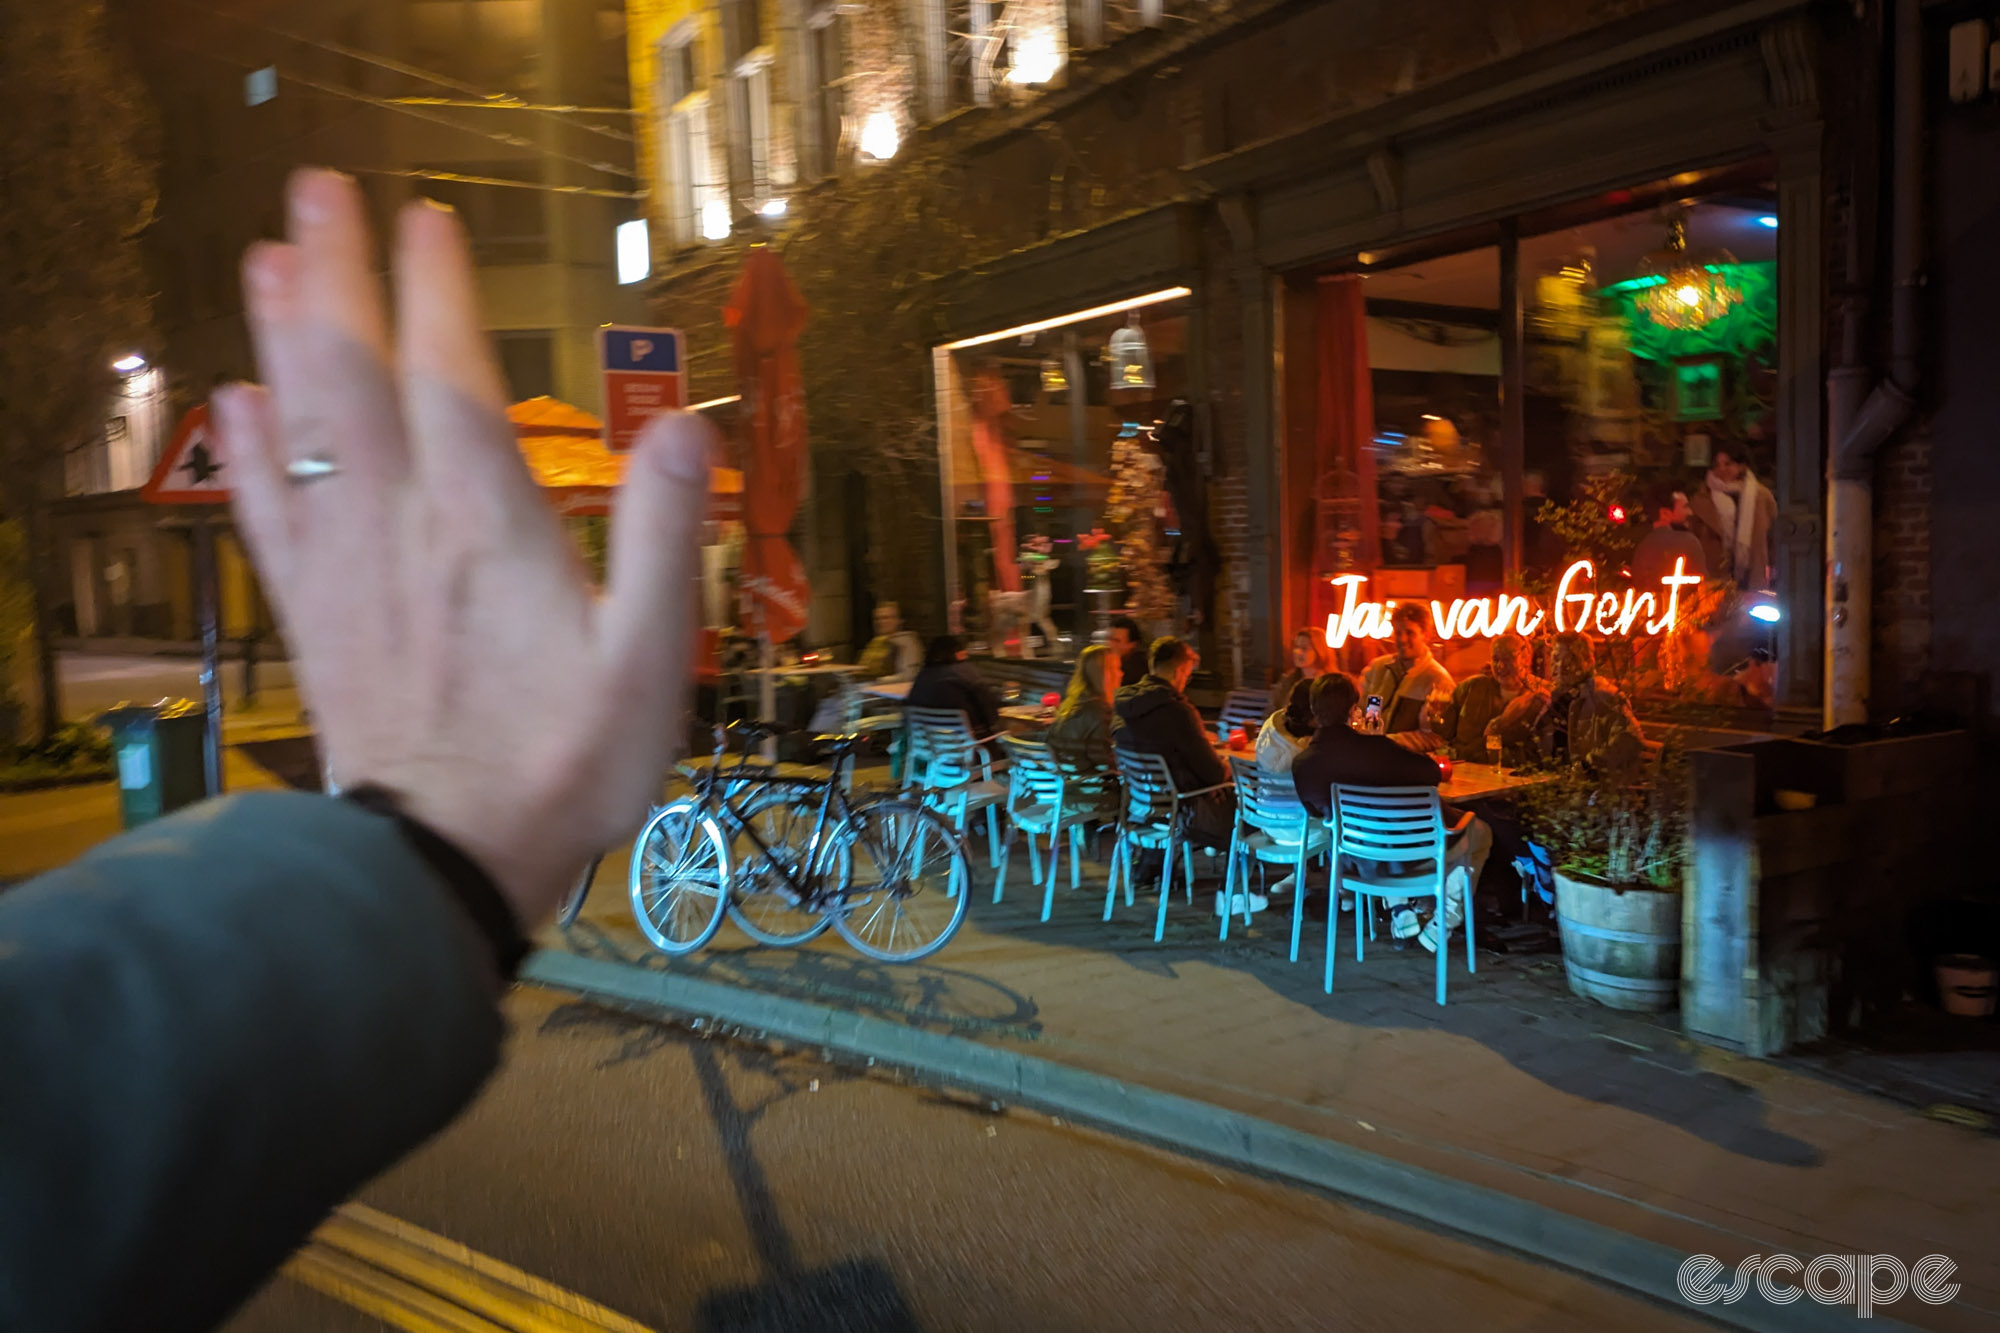 A hand waves in the foreground. A group sitting outside a bar do not reciprocate. 